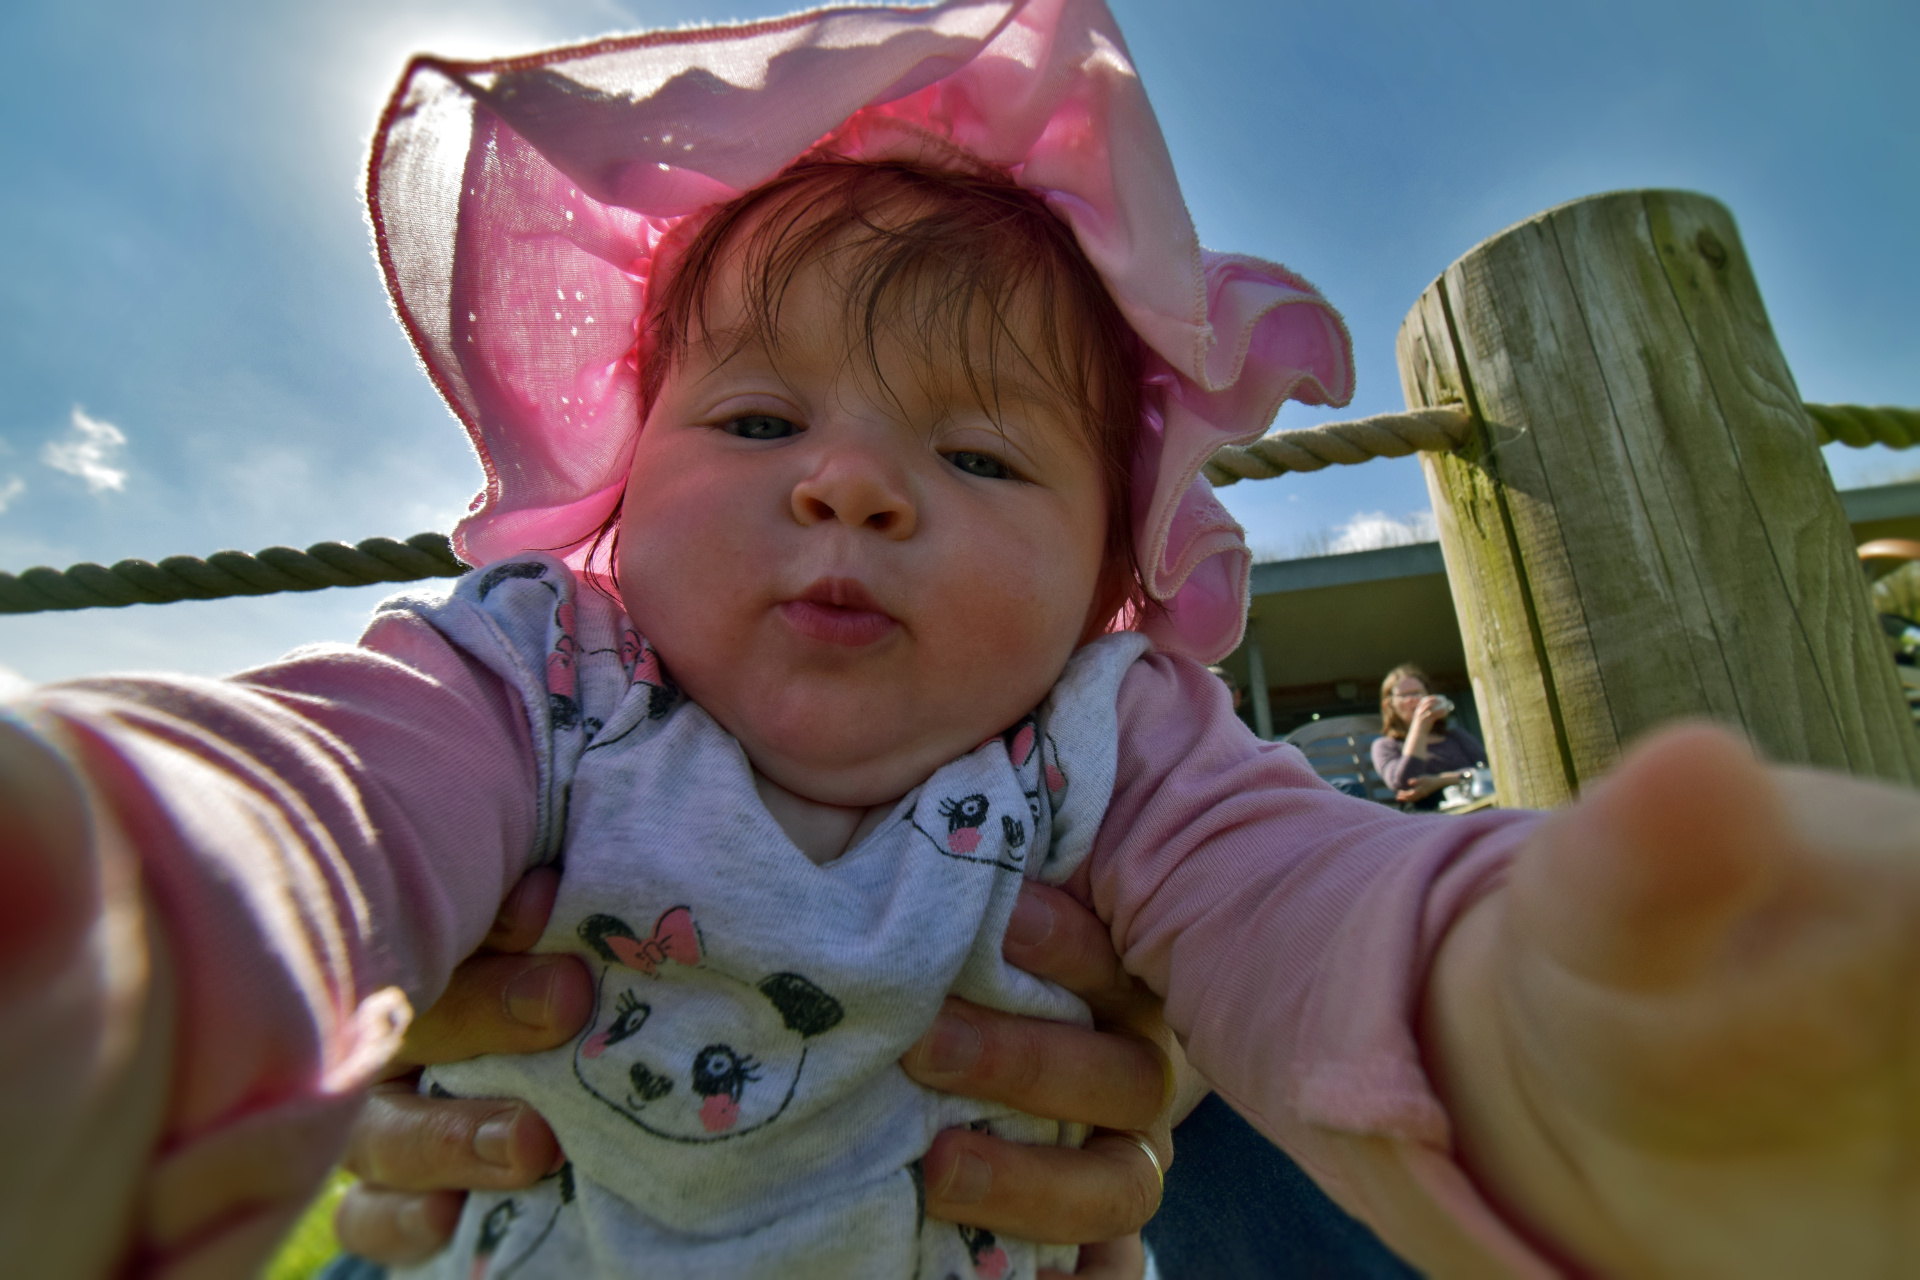 Lying down in the grass, I photograph a baby girl with a pink sun hat as she grabs the lens of my camera.